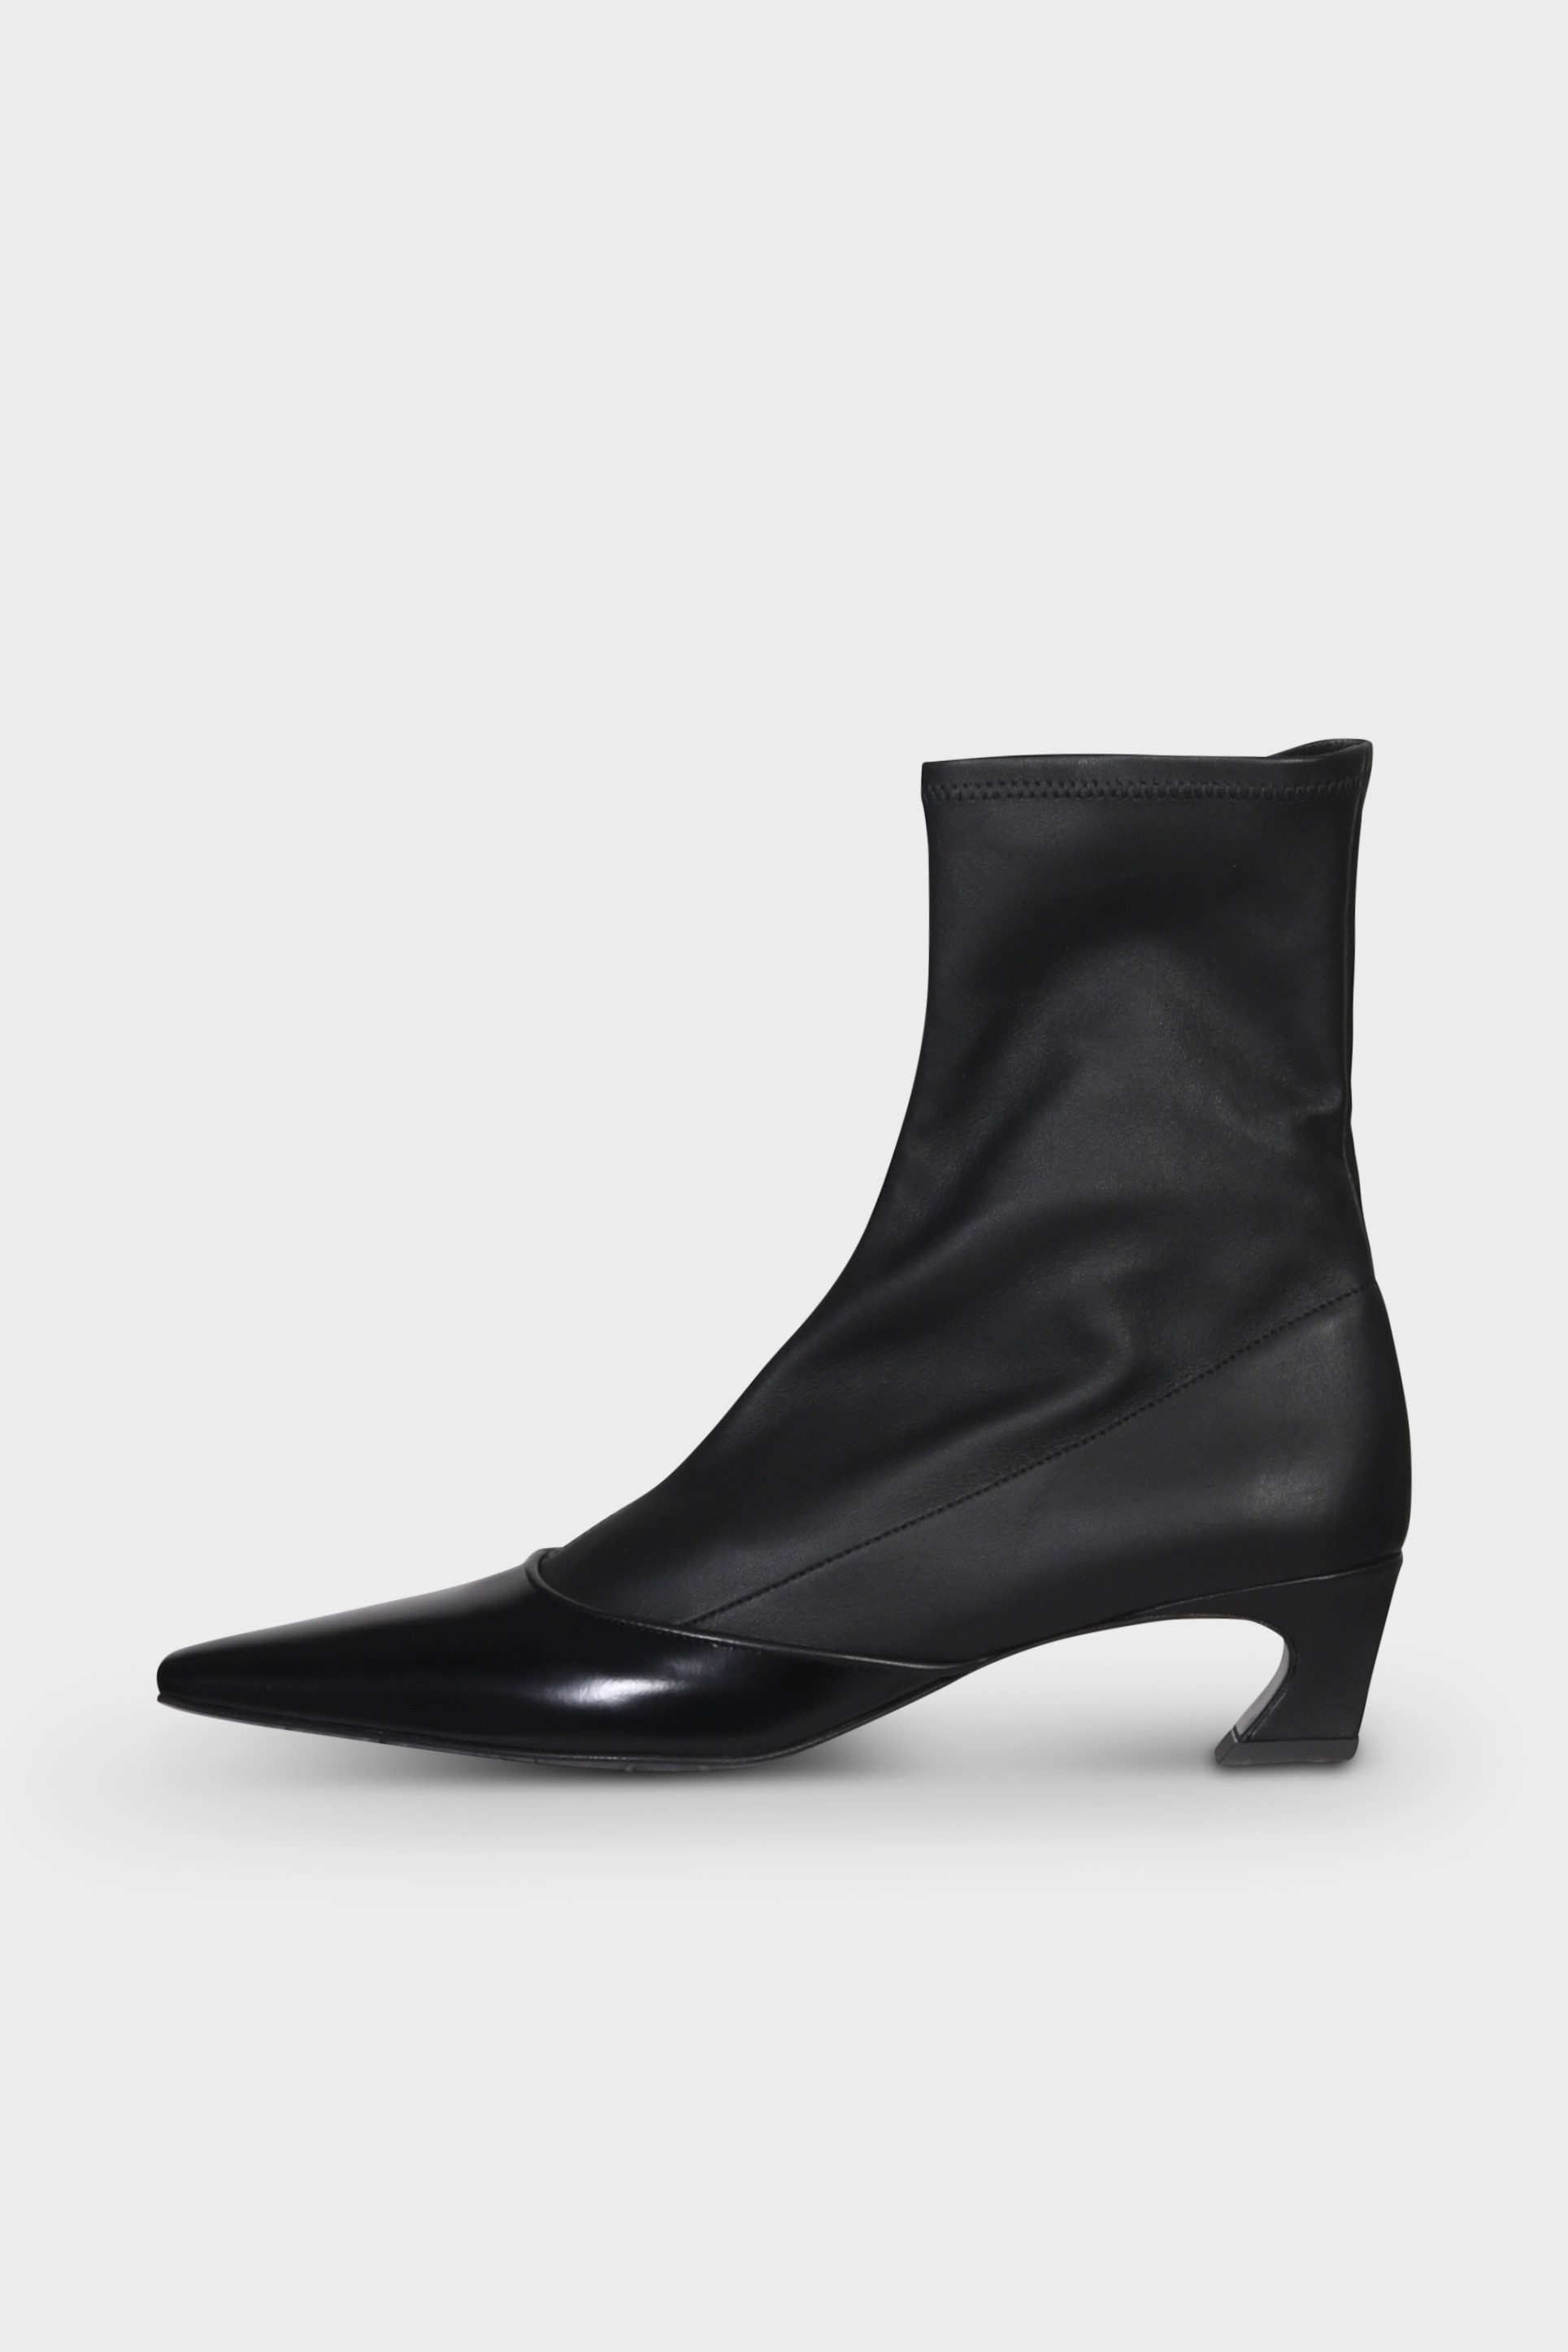 ACNE STUDIOS Ankle Boots in Black 39